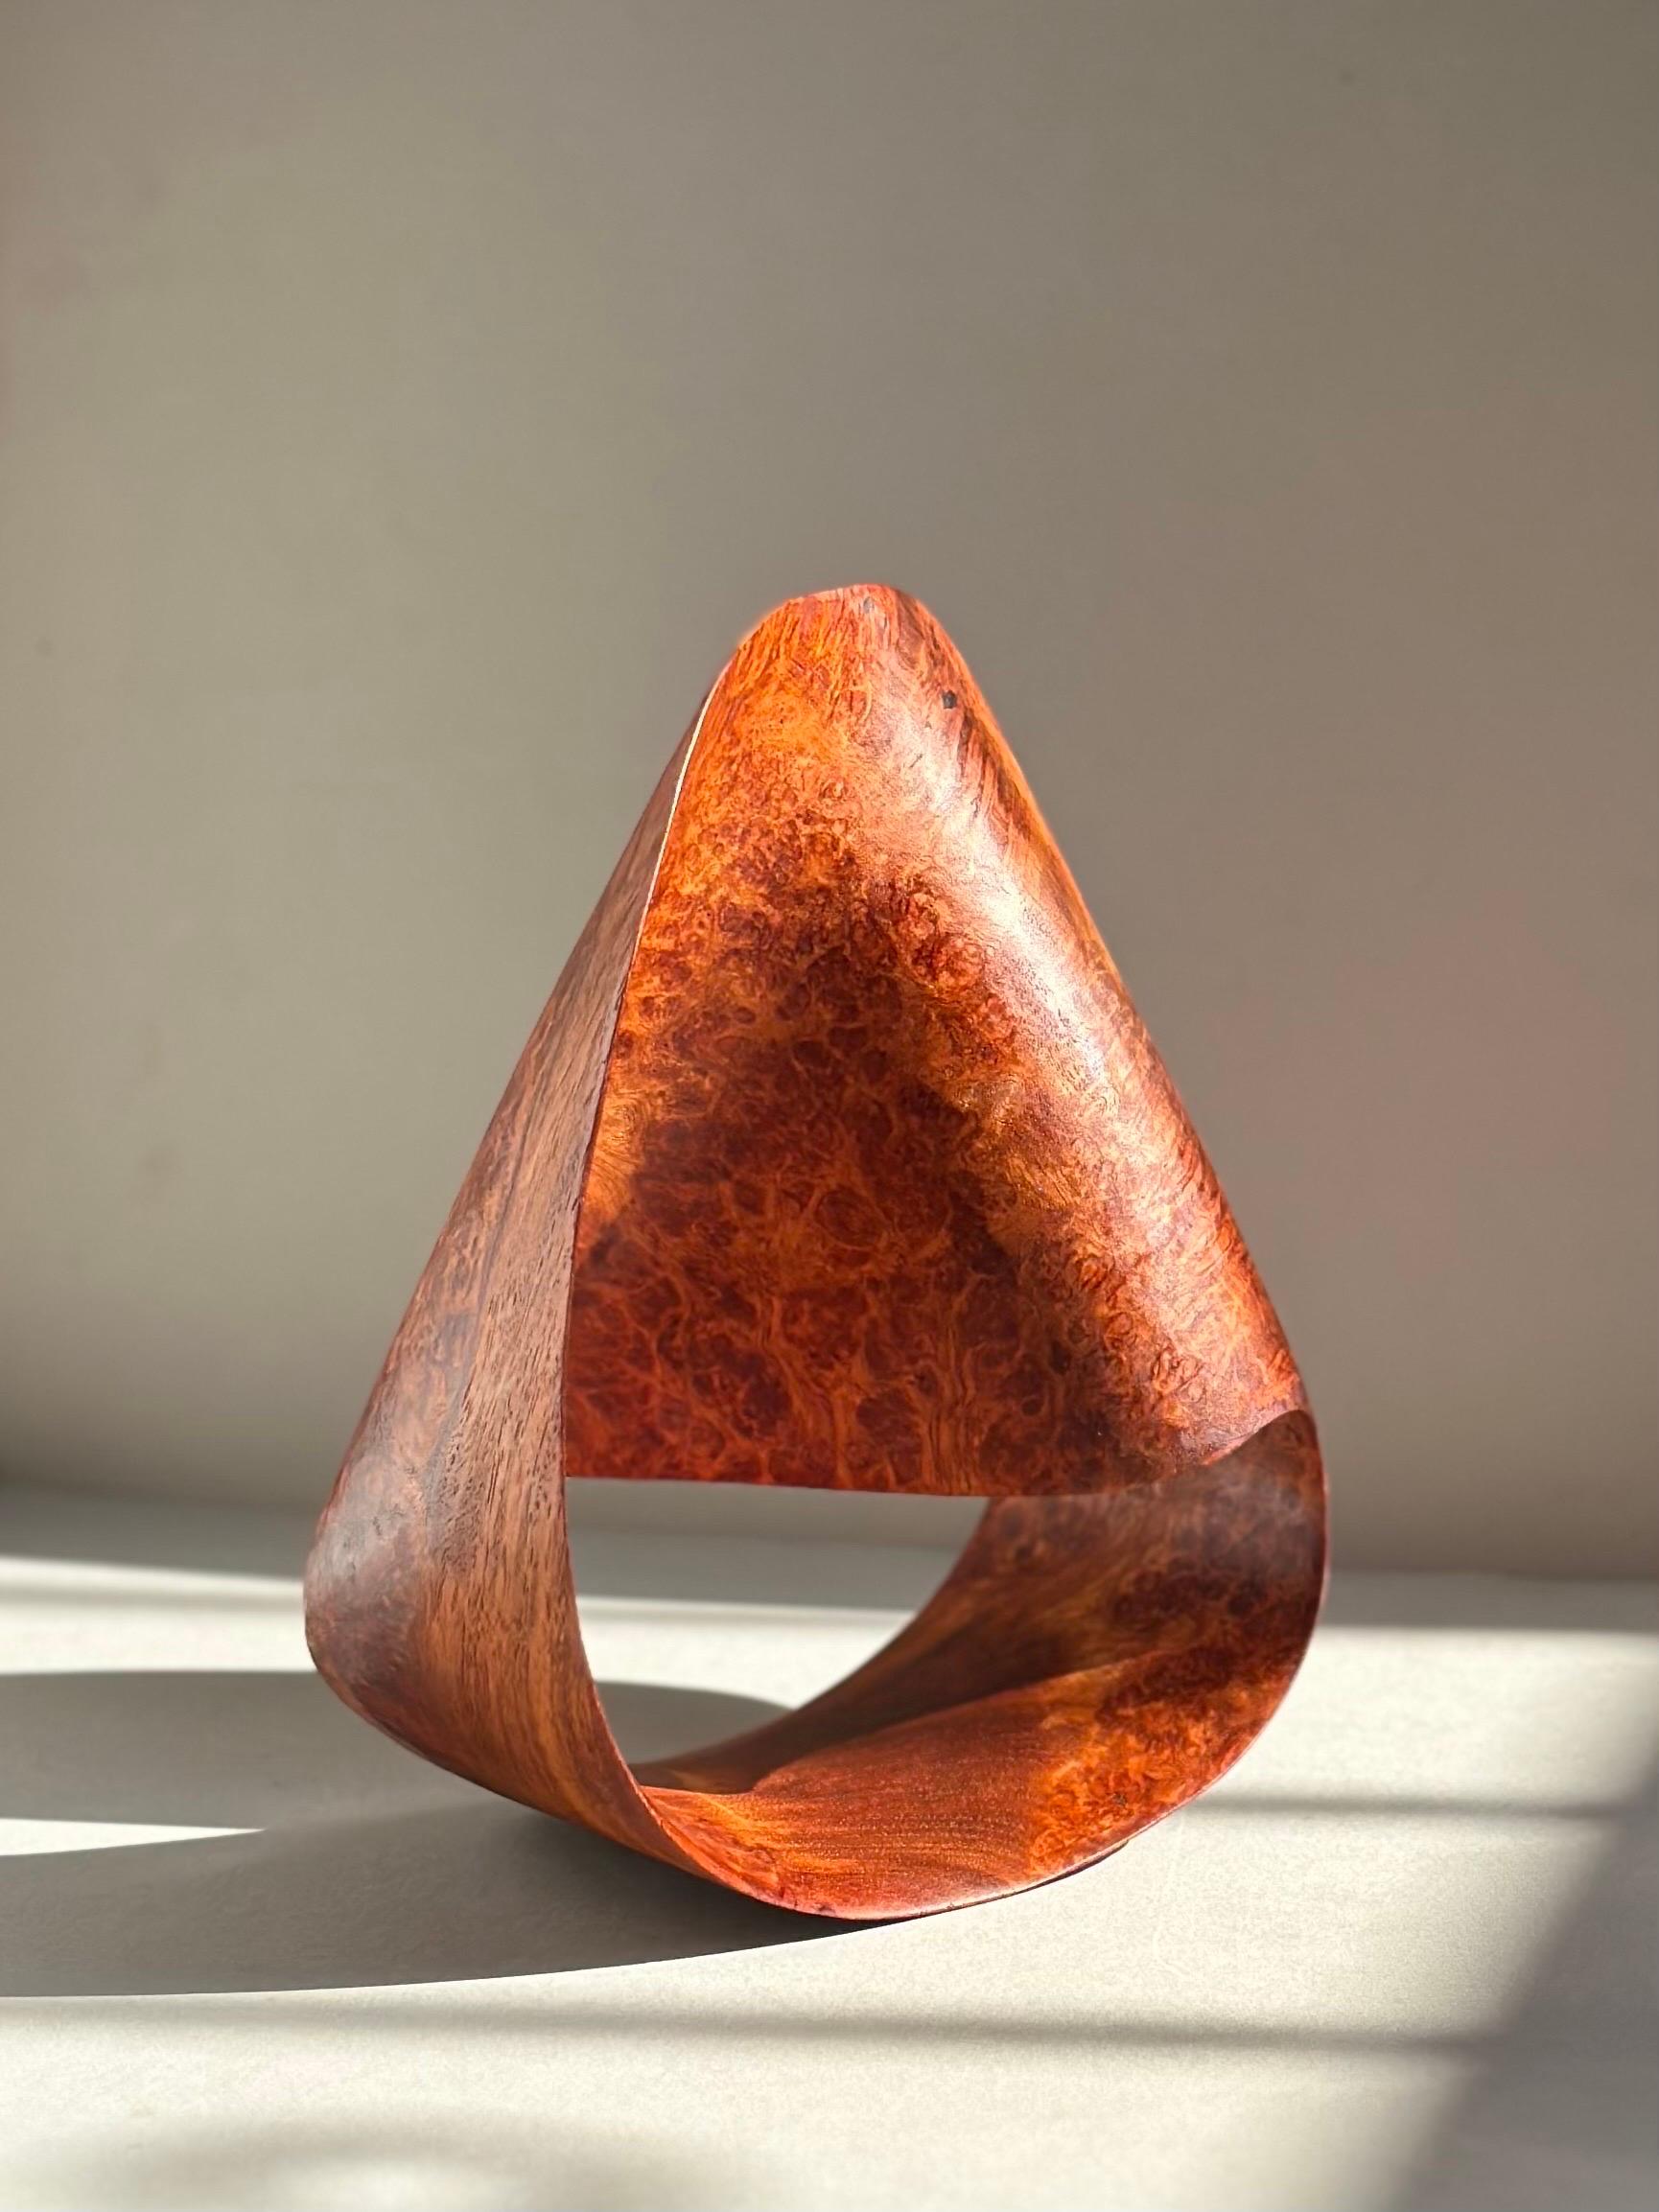 A Mobius Strip sculpture expertly crafted in steam bent maple burl with beautiful figure and an even patina. The Mobius strip is an alluring object discovered in the mid 19th century whose properties serve as an apt representation of the human